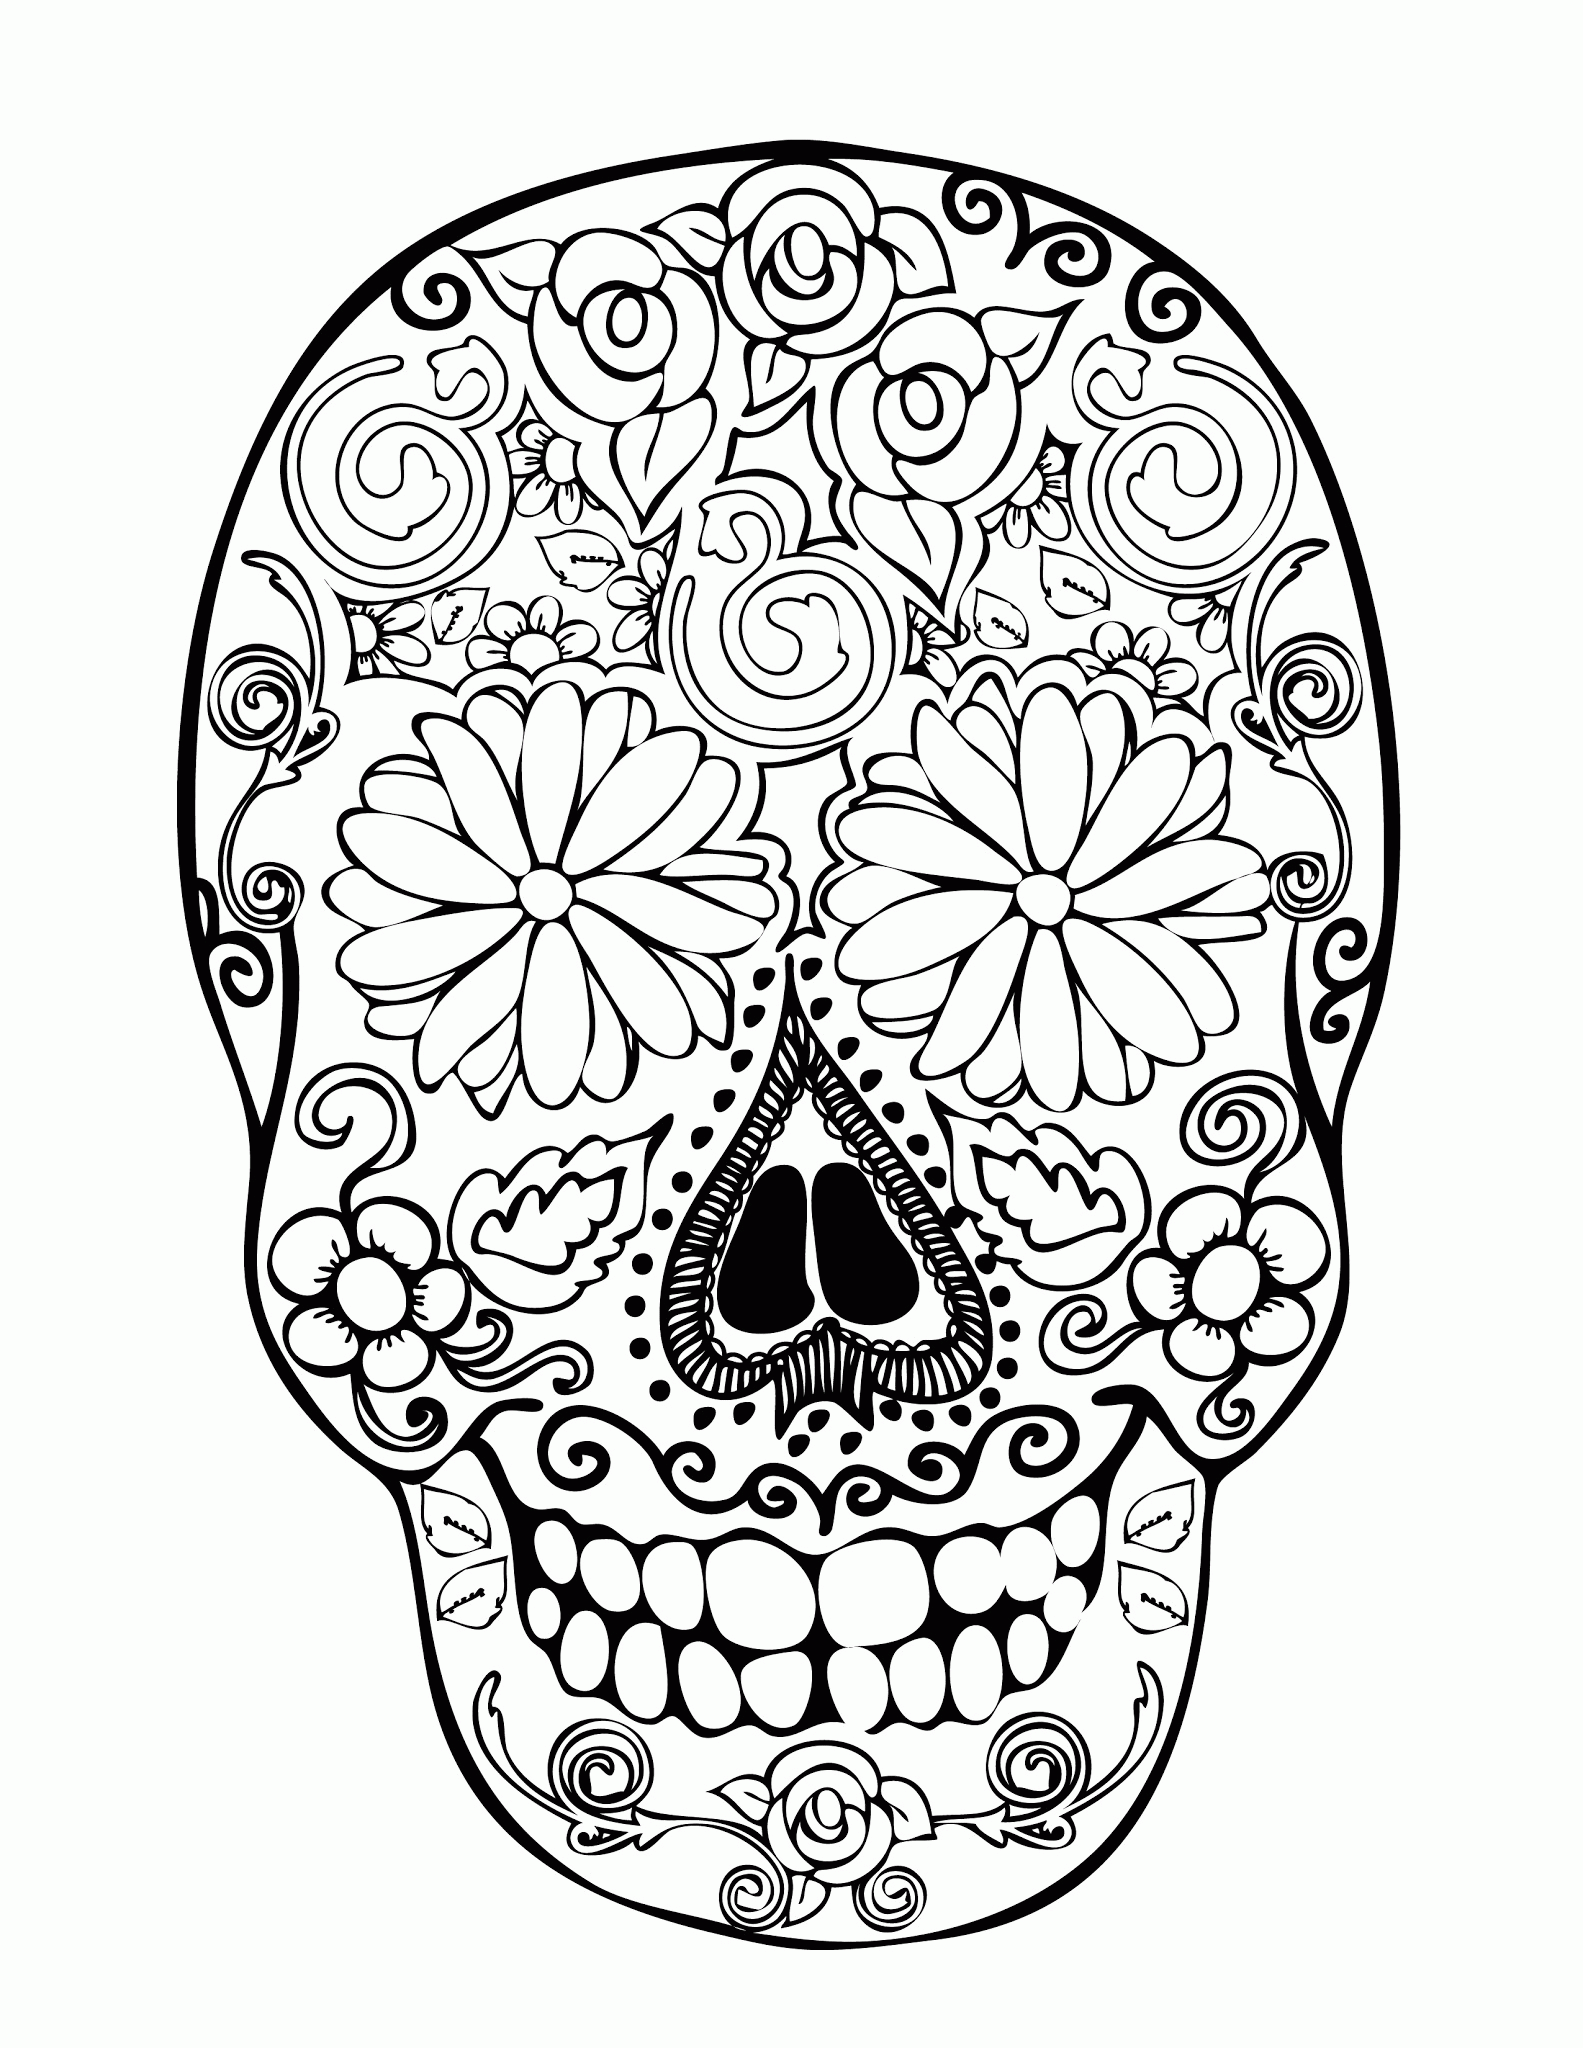 Download Easy Sugar Skull Coloring Pages - Coloring Home